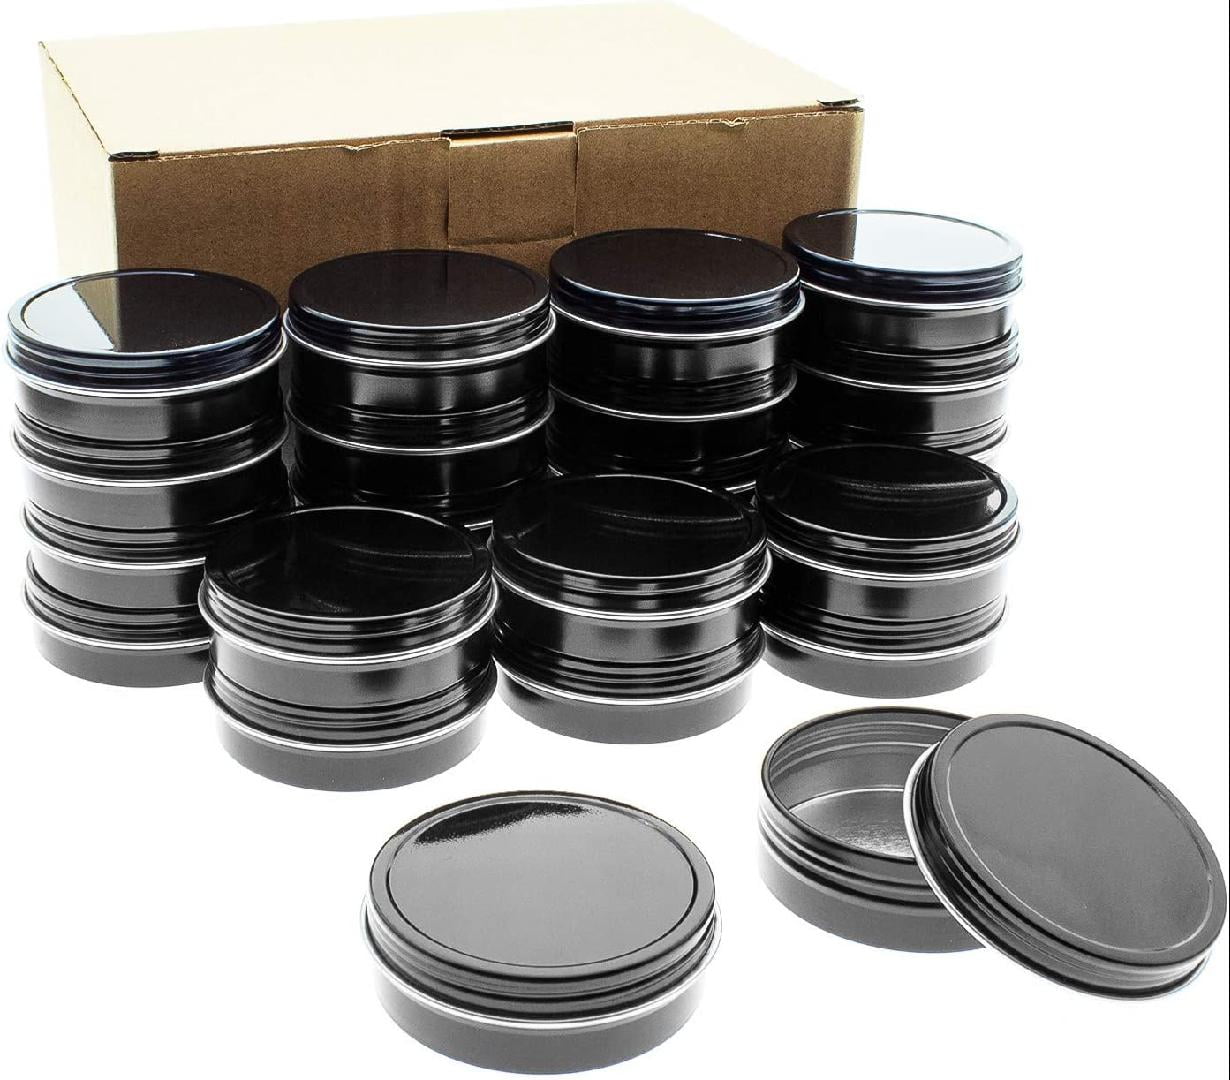 Qixivcom 6 Pack 5 Oz Black Aluminum Tin Cans Round Metal Steel Tins  Container Screw Top Lid 150ml DIY Candle Tins Cosmetic Sample Container  Storage